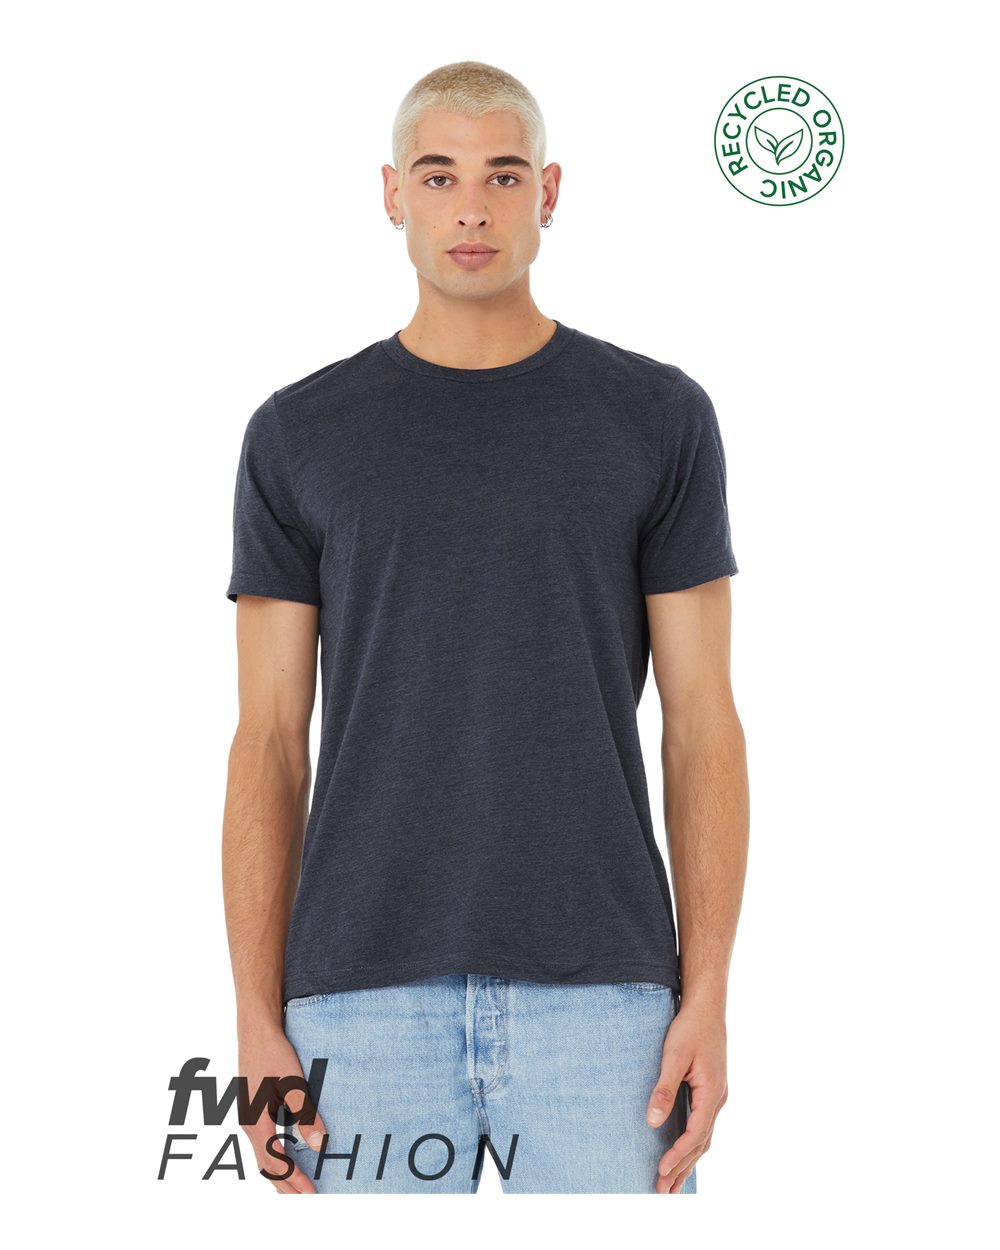 BELLA + CANVAS - FWD Fashion Jersey Recycled Organic Tee - 3001RCY